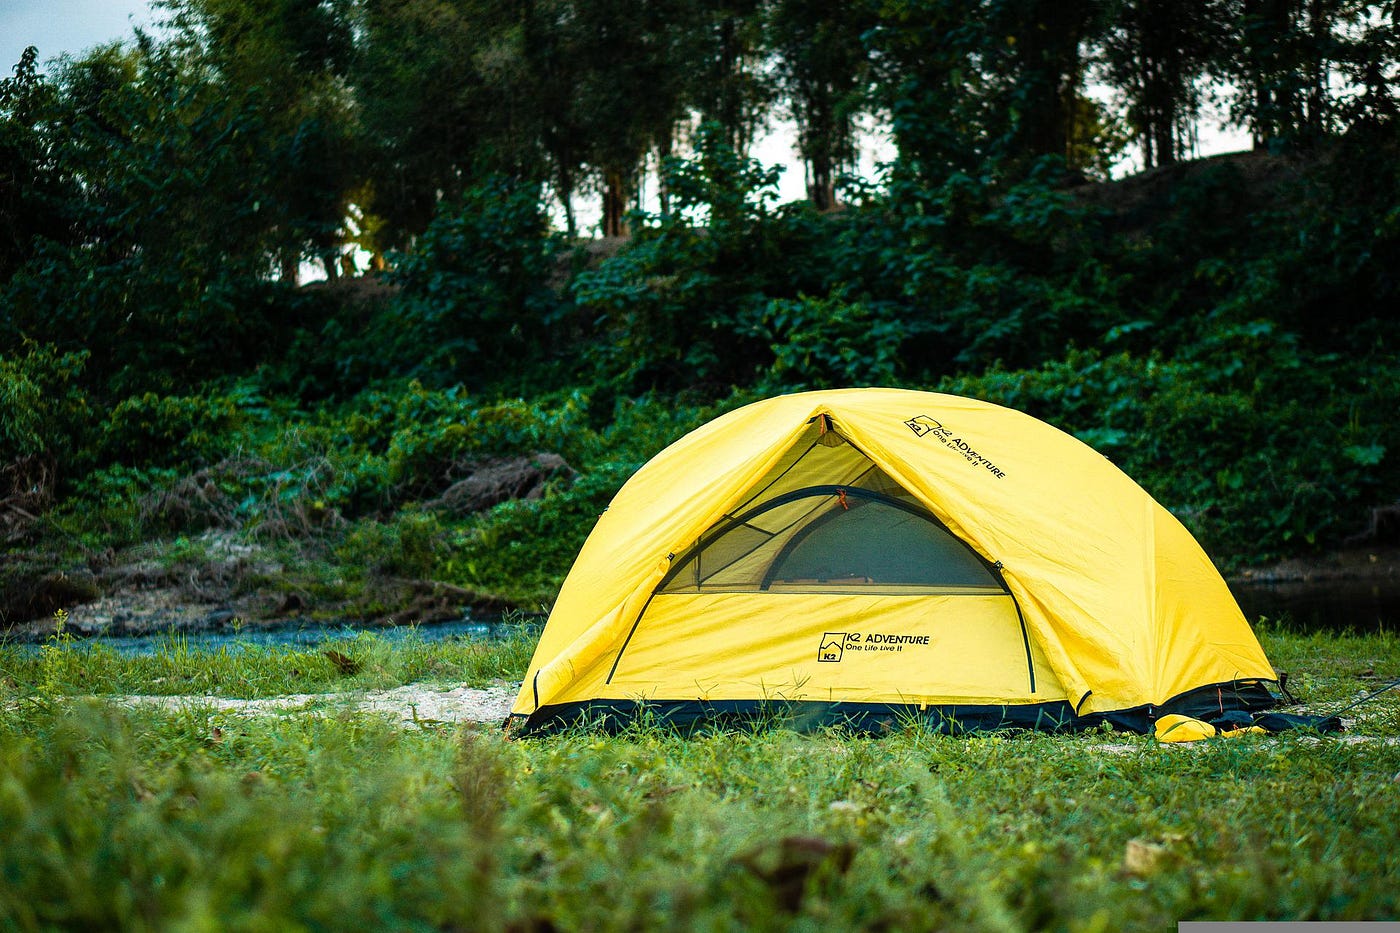 Top 5 Next level Camping Gadgets That Everyone Should Have While Camping: |  by Jawad | Medium